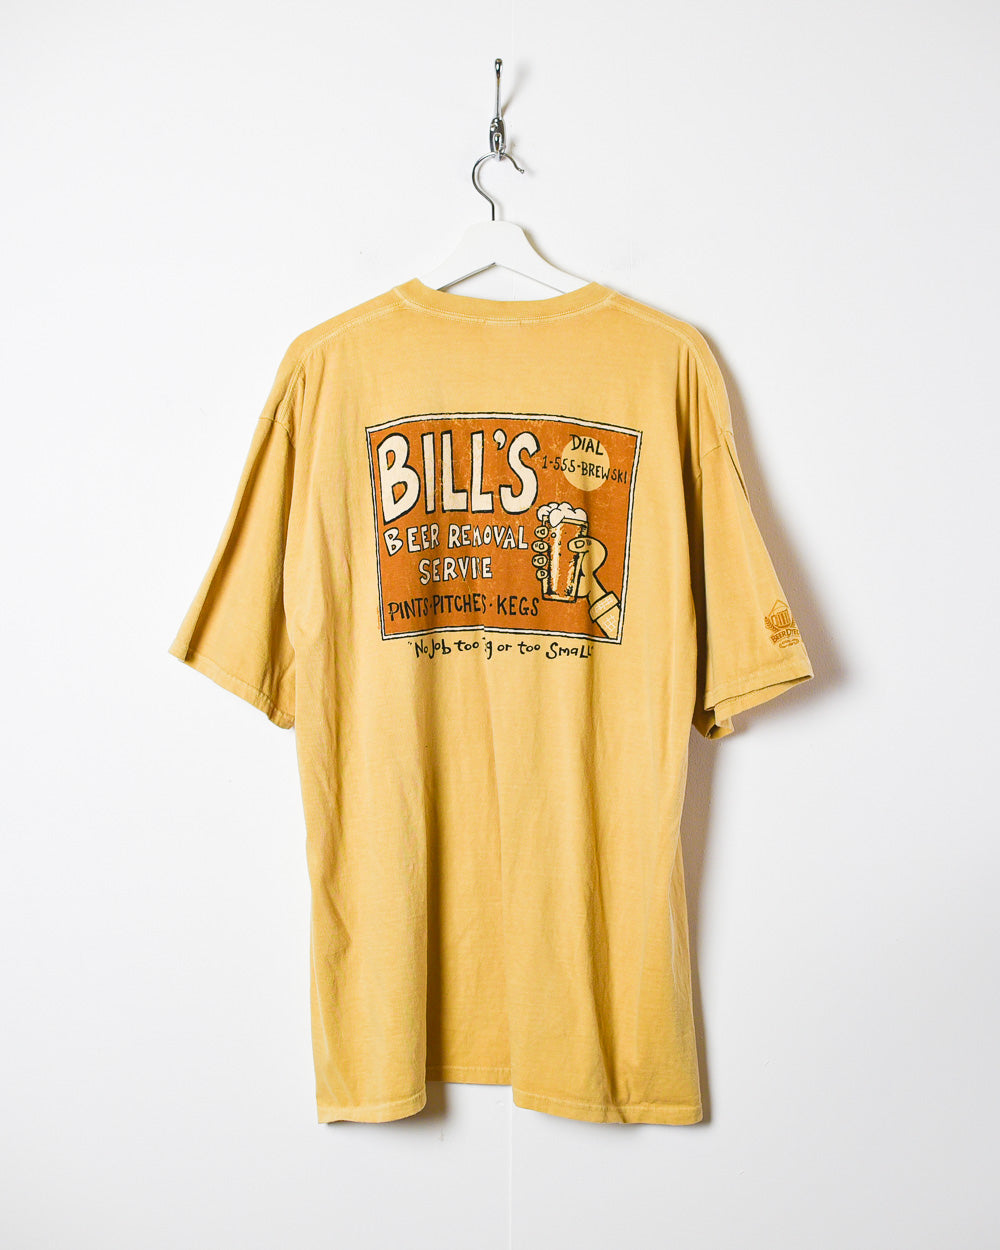 Neutral Bill's Beer Removal Service Graphic T-Shirt - X-Large